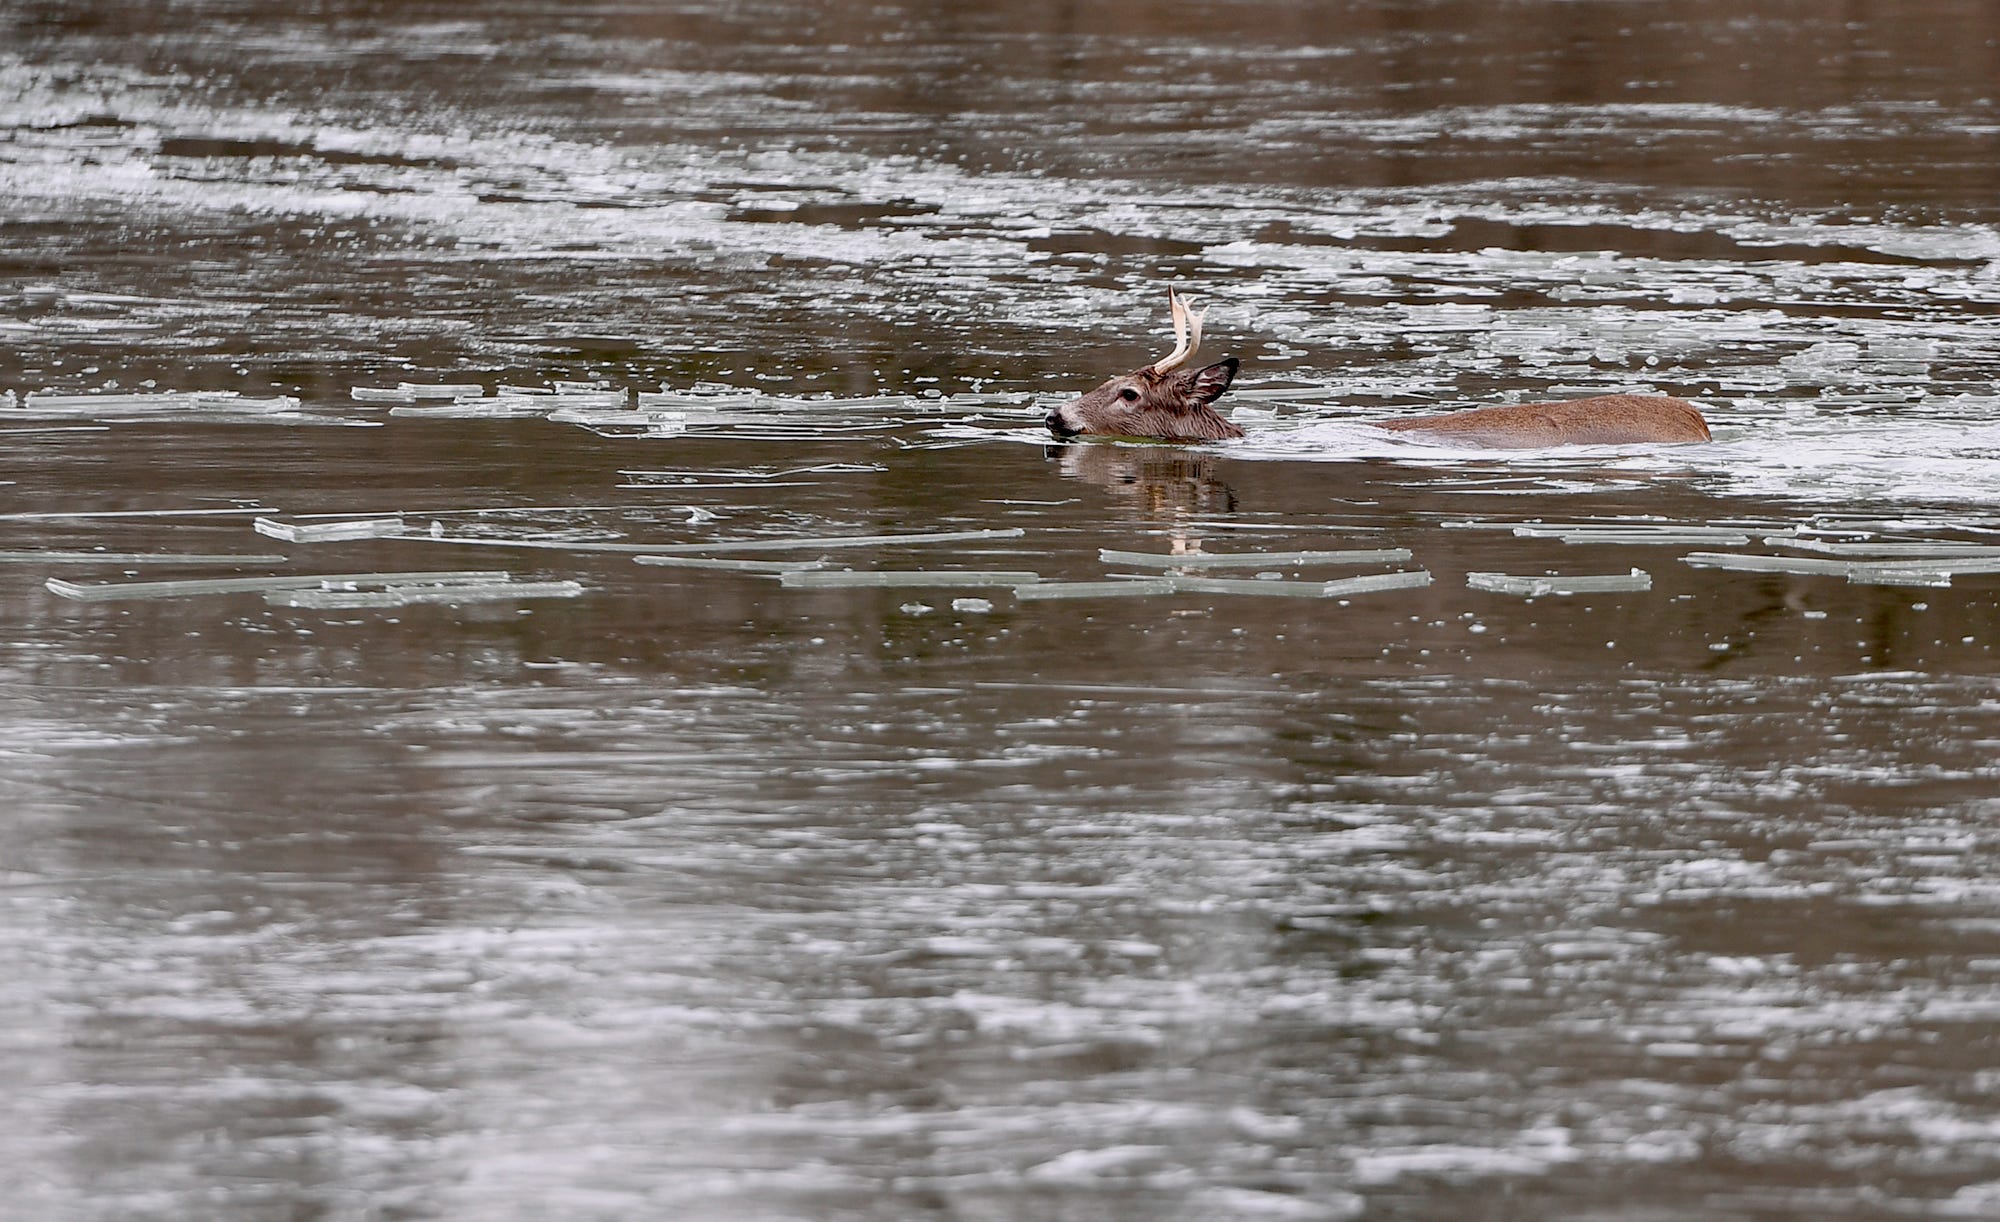 A whitetail buck swims back to shore after falling through the ice at Gifford Pinchot State Park, Saturday, January 11, 2019. Park officials wearing special ice rescue dry suits,  broke up the ice creating a path for the two deer eventually swim to shore.
John A. Pavoncello photo